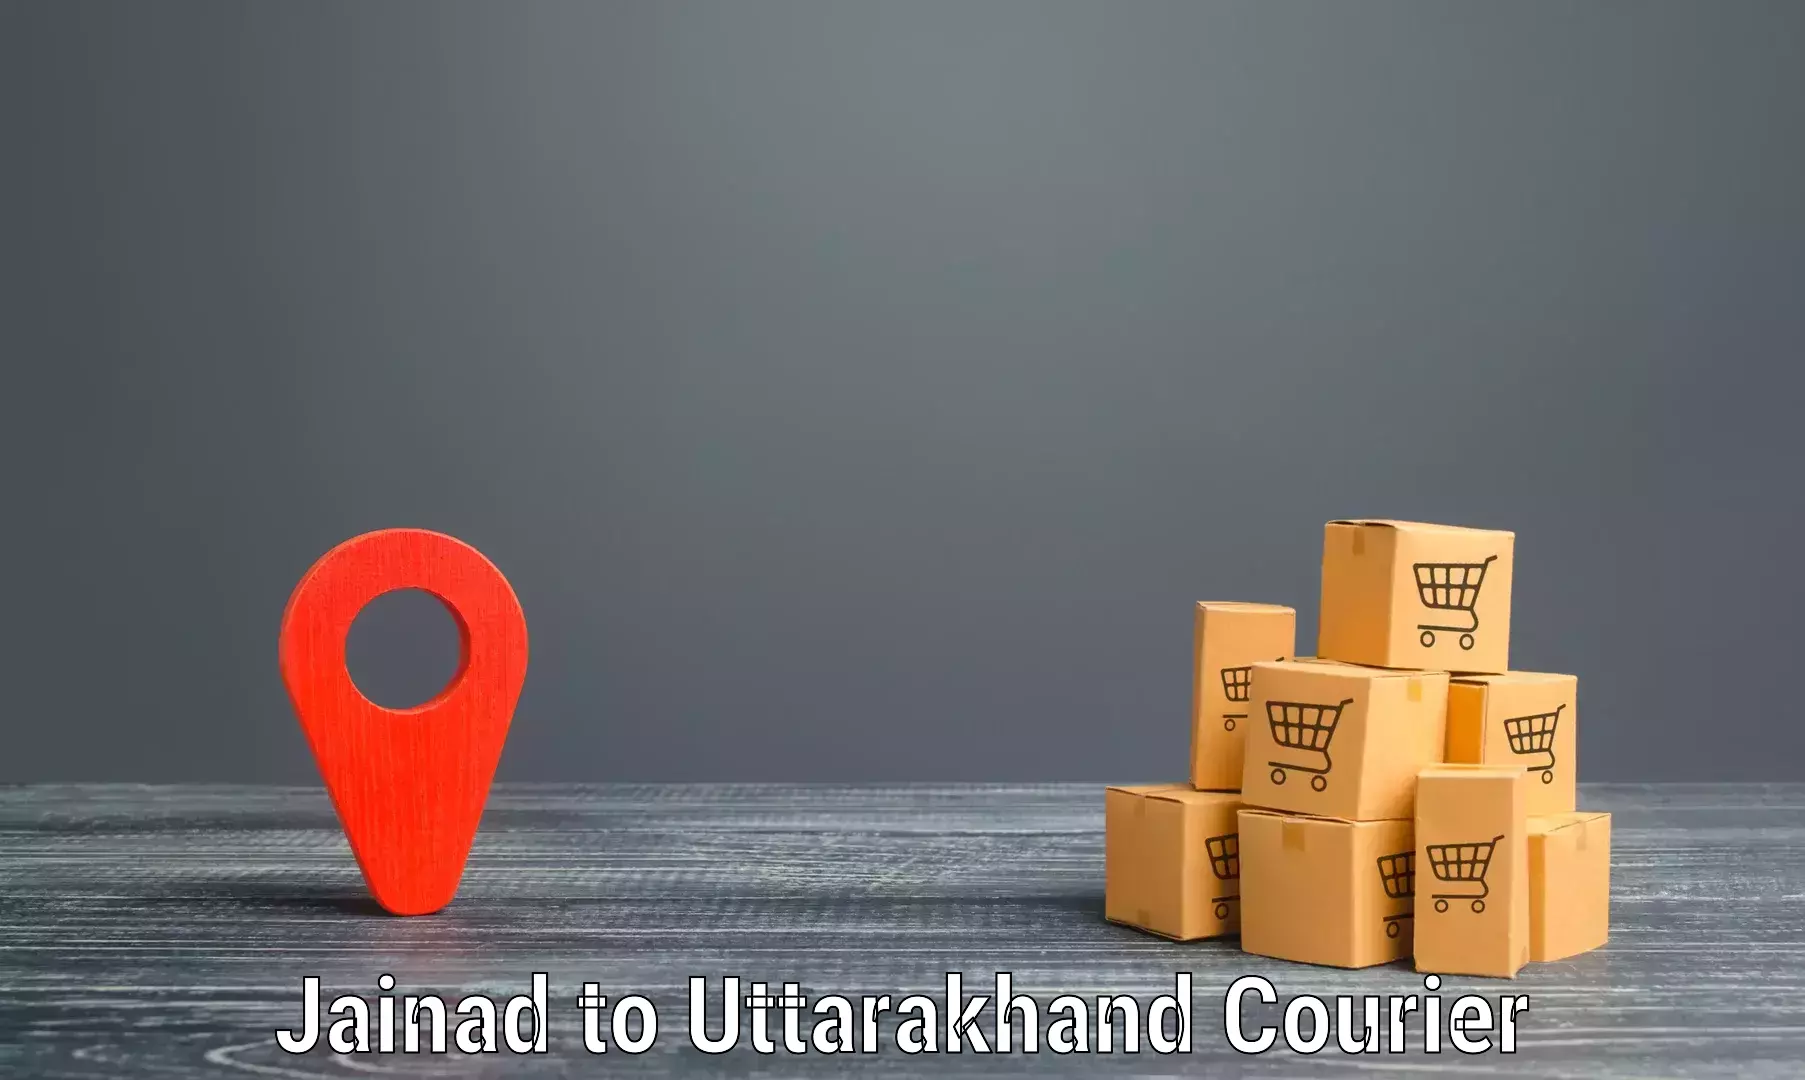 Efficient parcel delivery in Jainad to Rishikesh